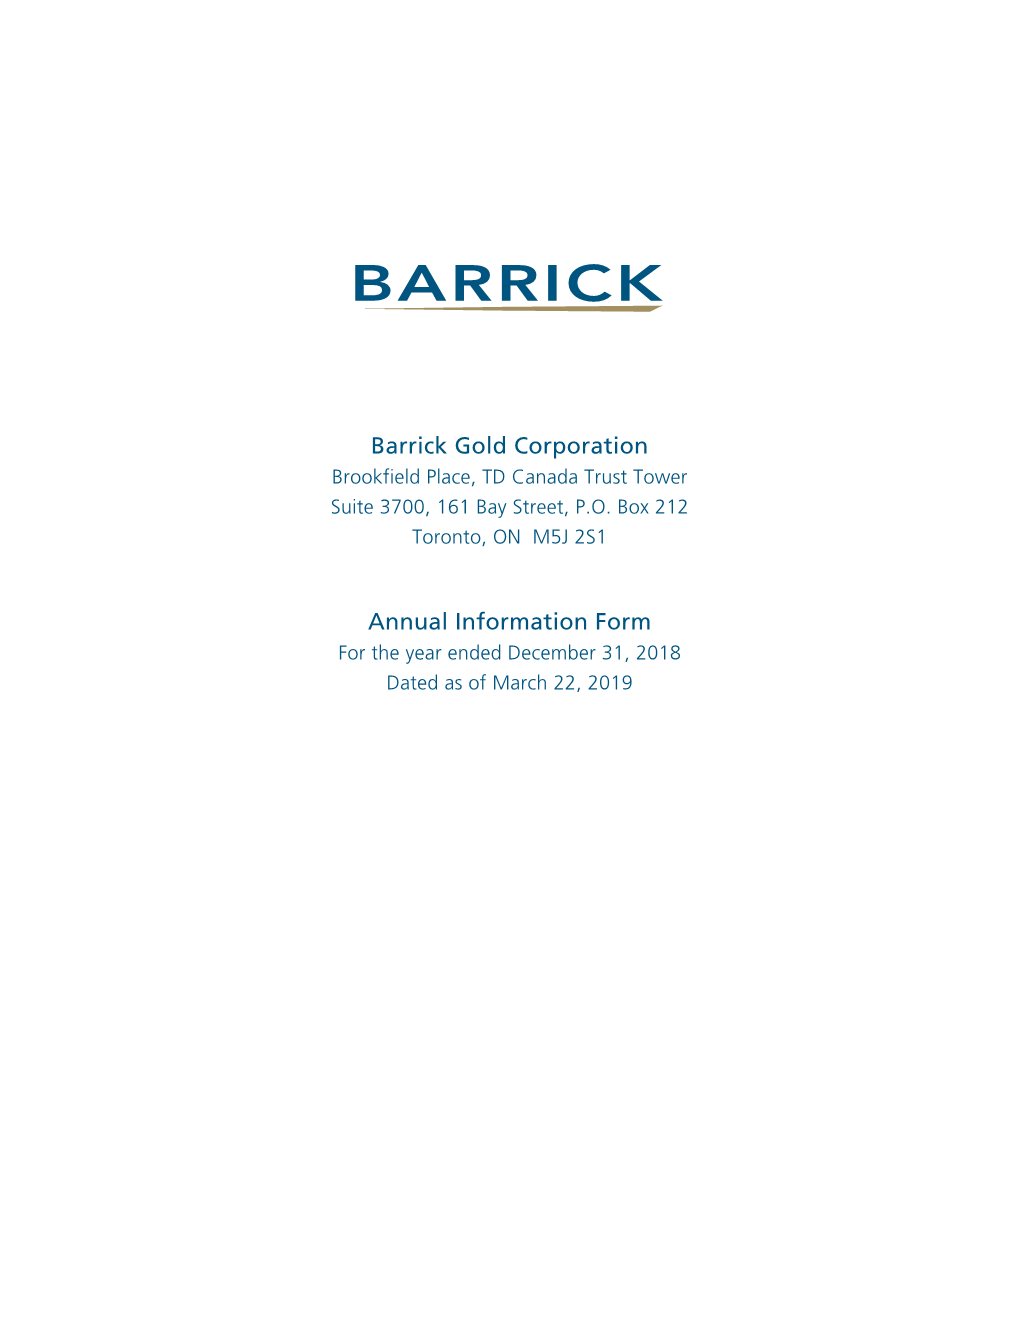 Annual Information Form for the Year Ended December 31, 2018 Dated As of March 22, 2019 BARRICK GOLD CORPORATION